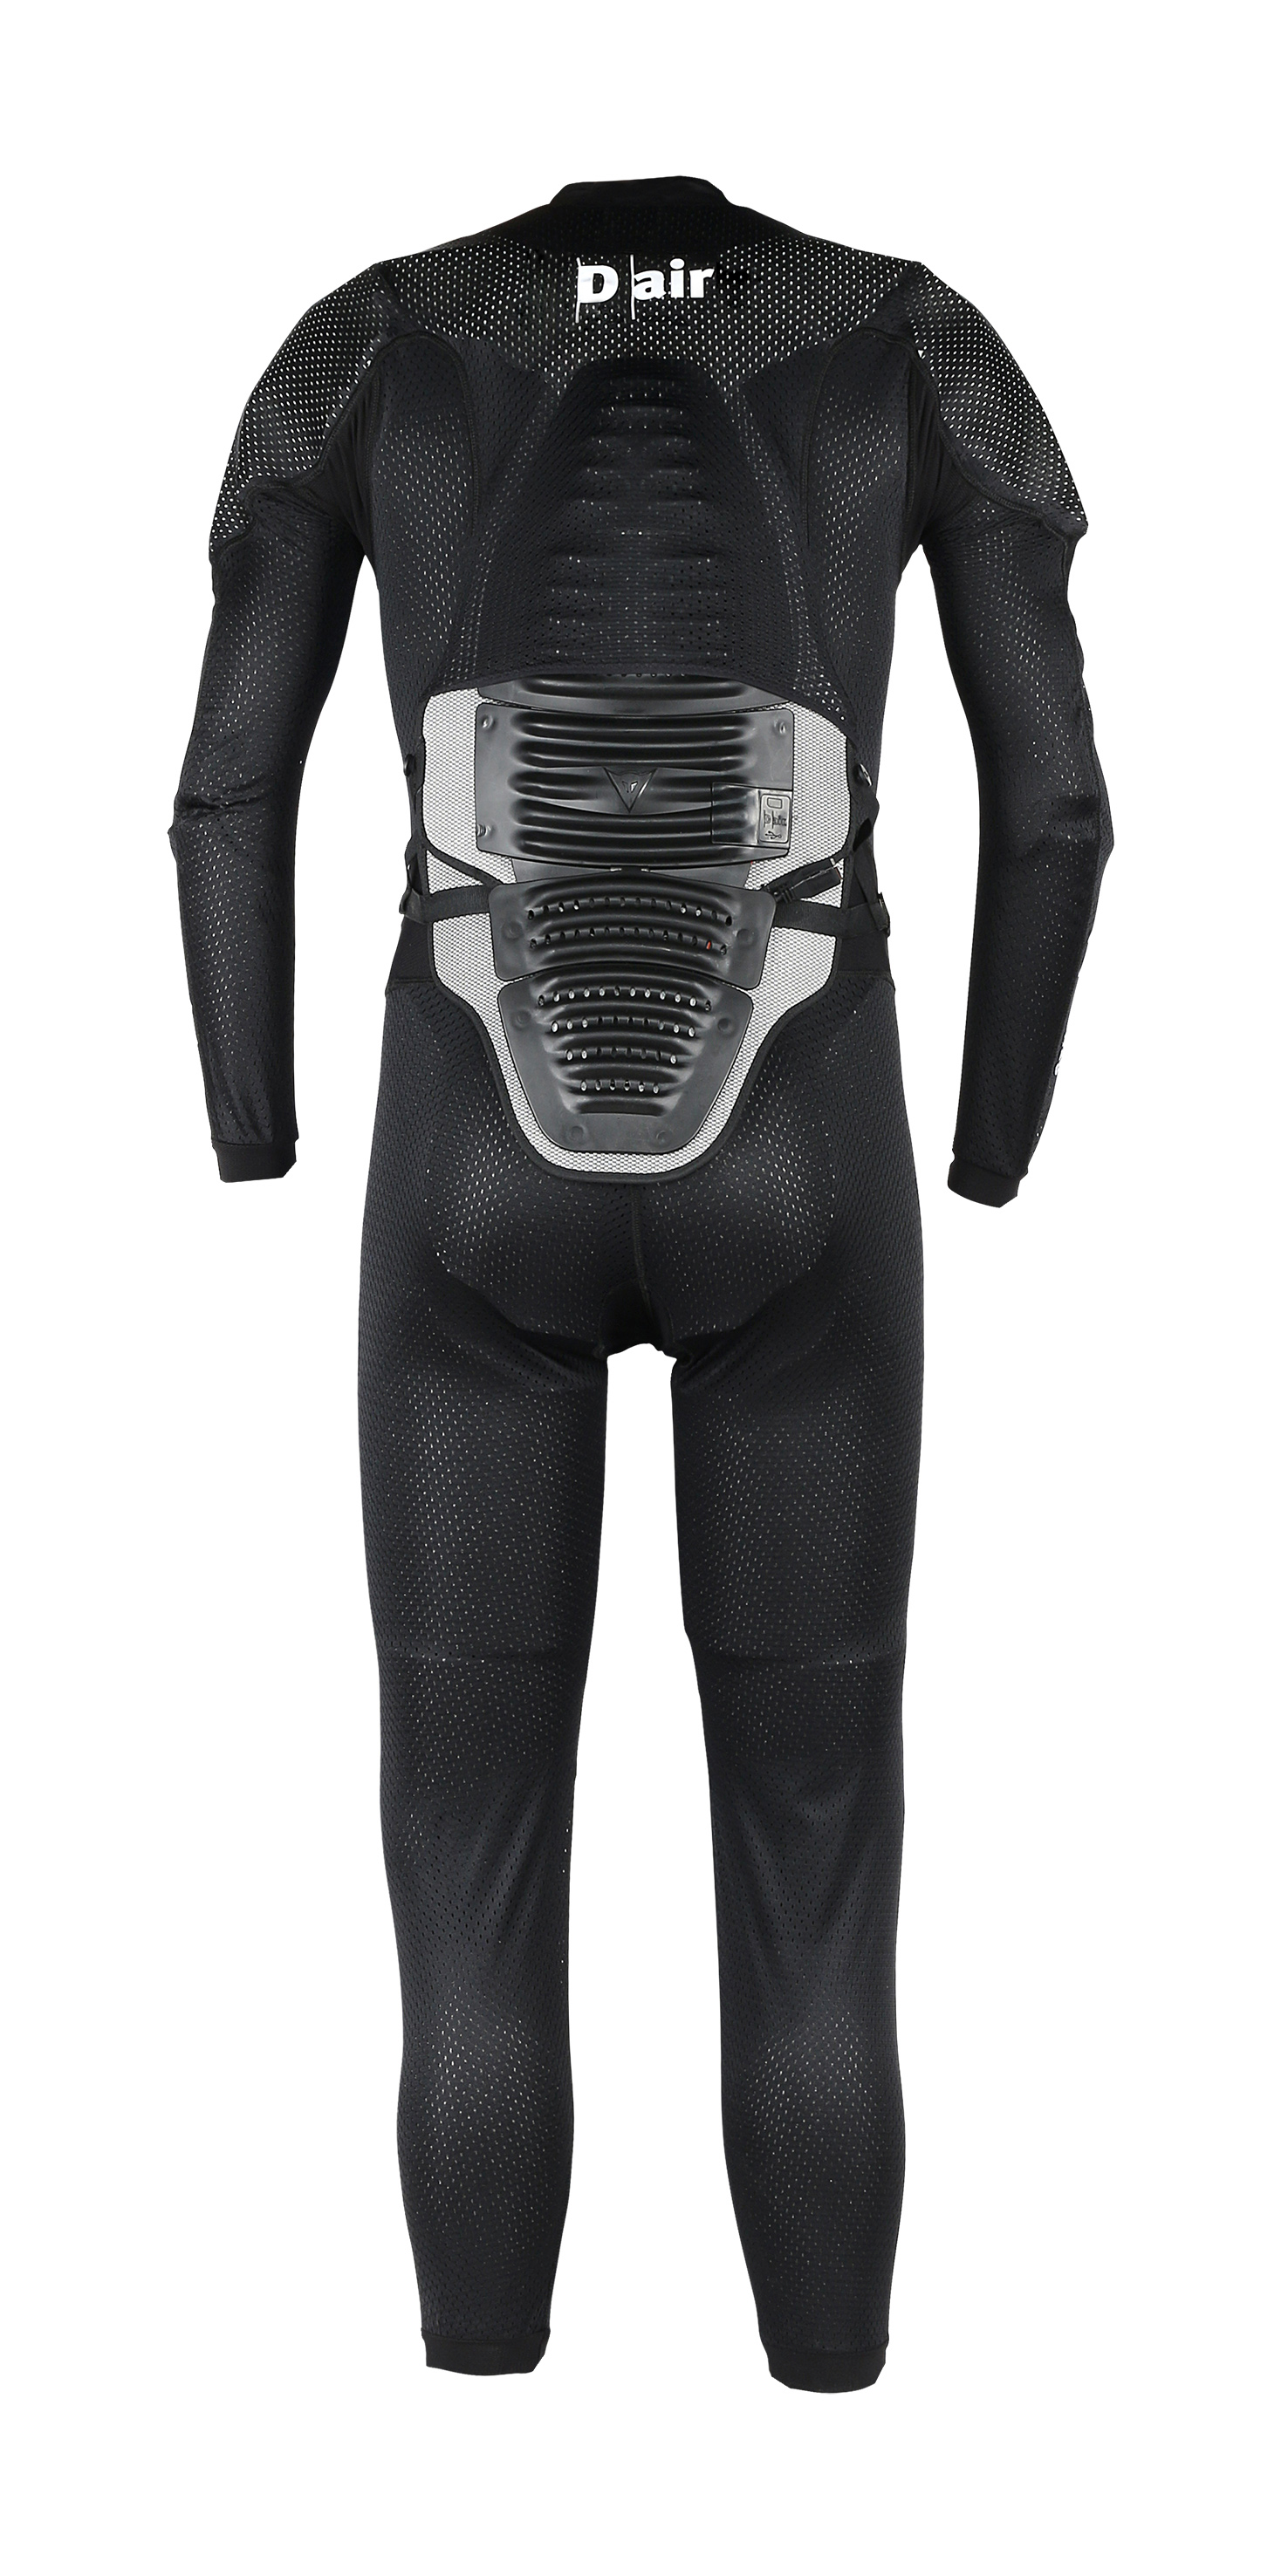 Dainese D Air Armor - Nuove Foto